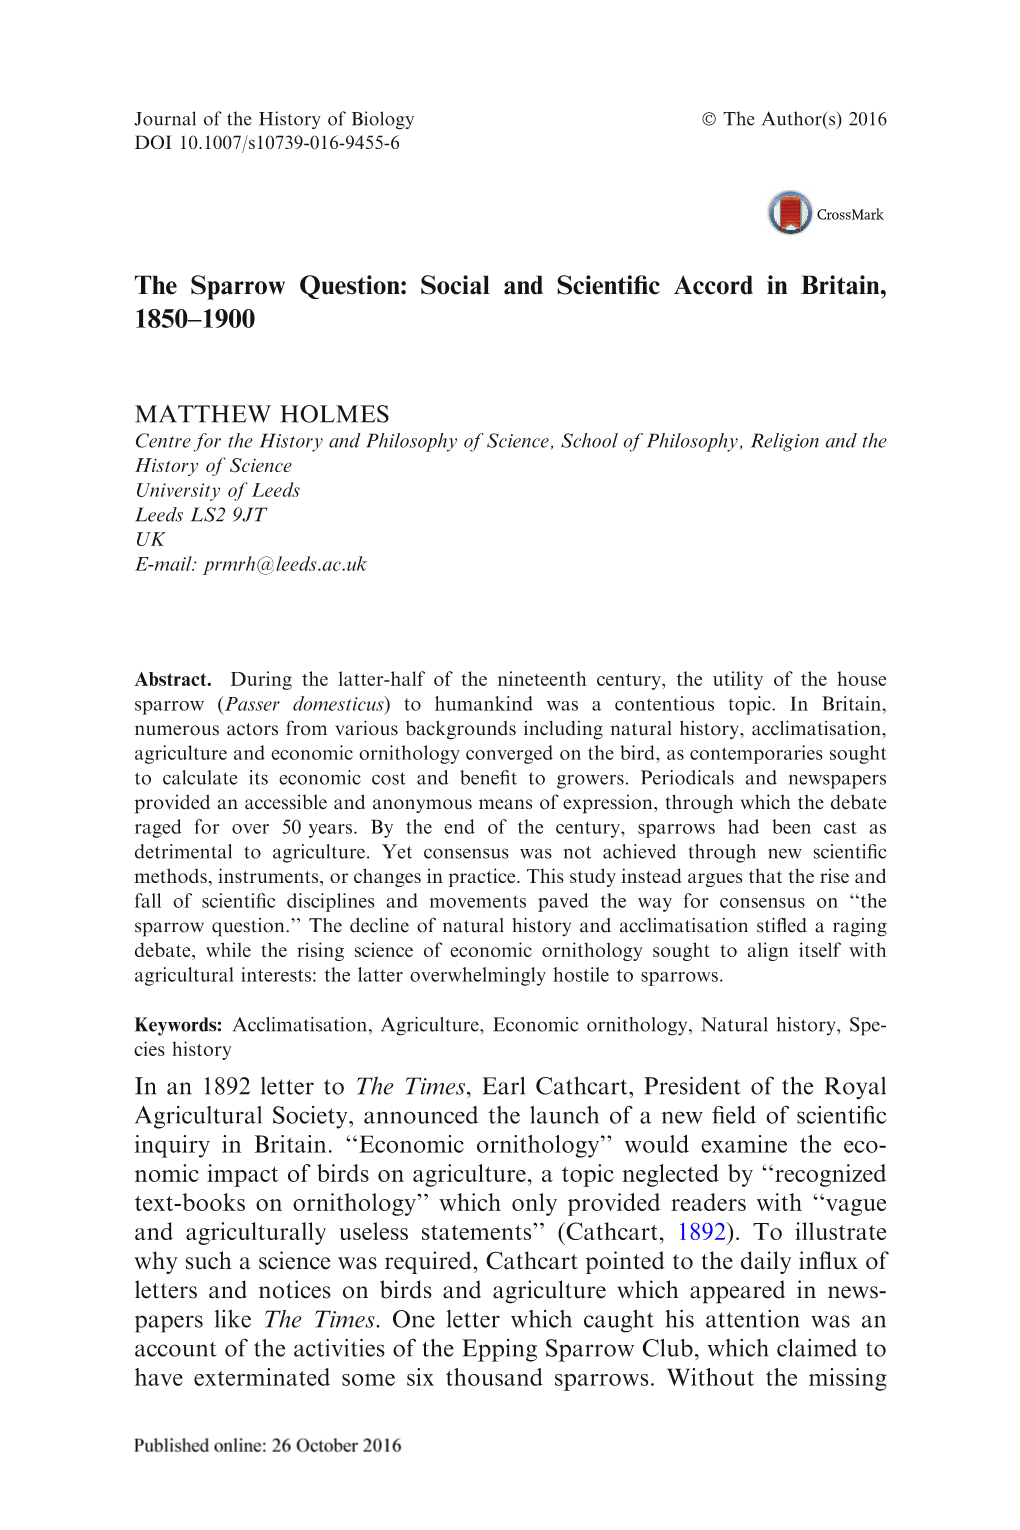 The Sparrow Question: Social and Scientific Accord in Britain, 1850–1900